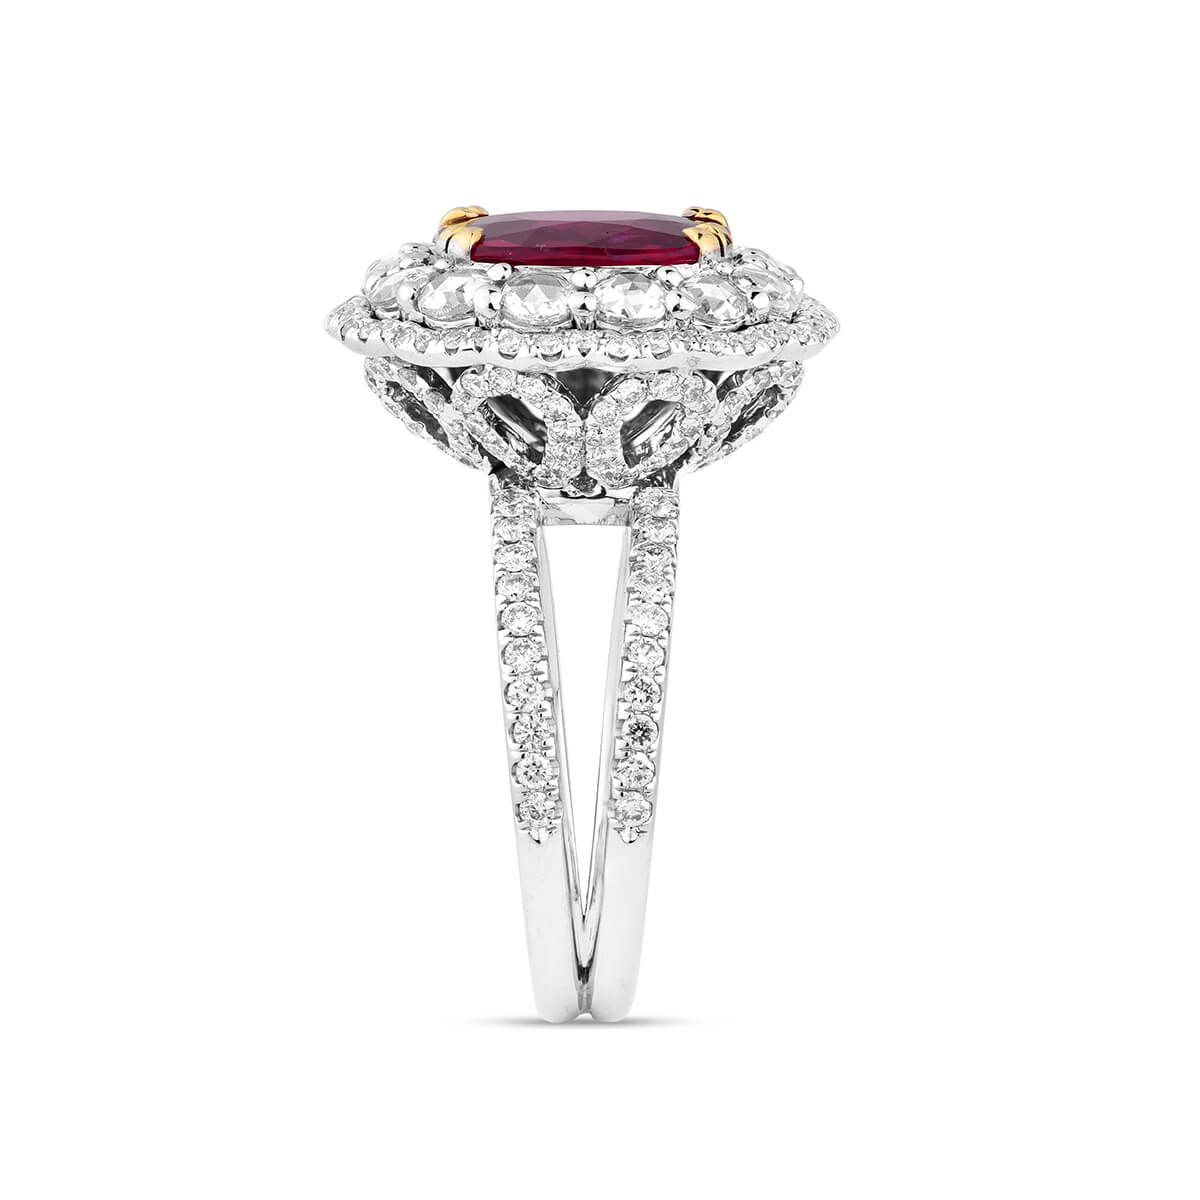 Natural Vivid Red Mozambique Ruby Ring, 3.03 Ct. (5.00 Ct. TW), GIA Certified, GRS2016-042732, Unheated